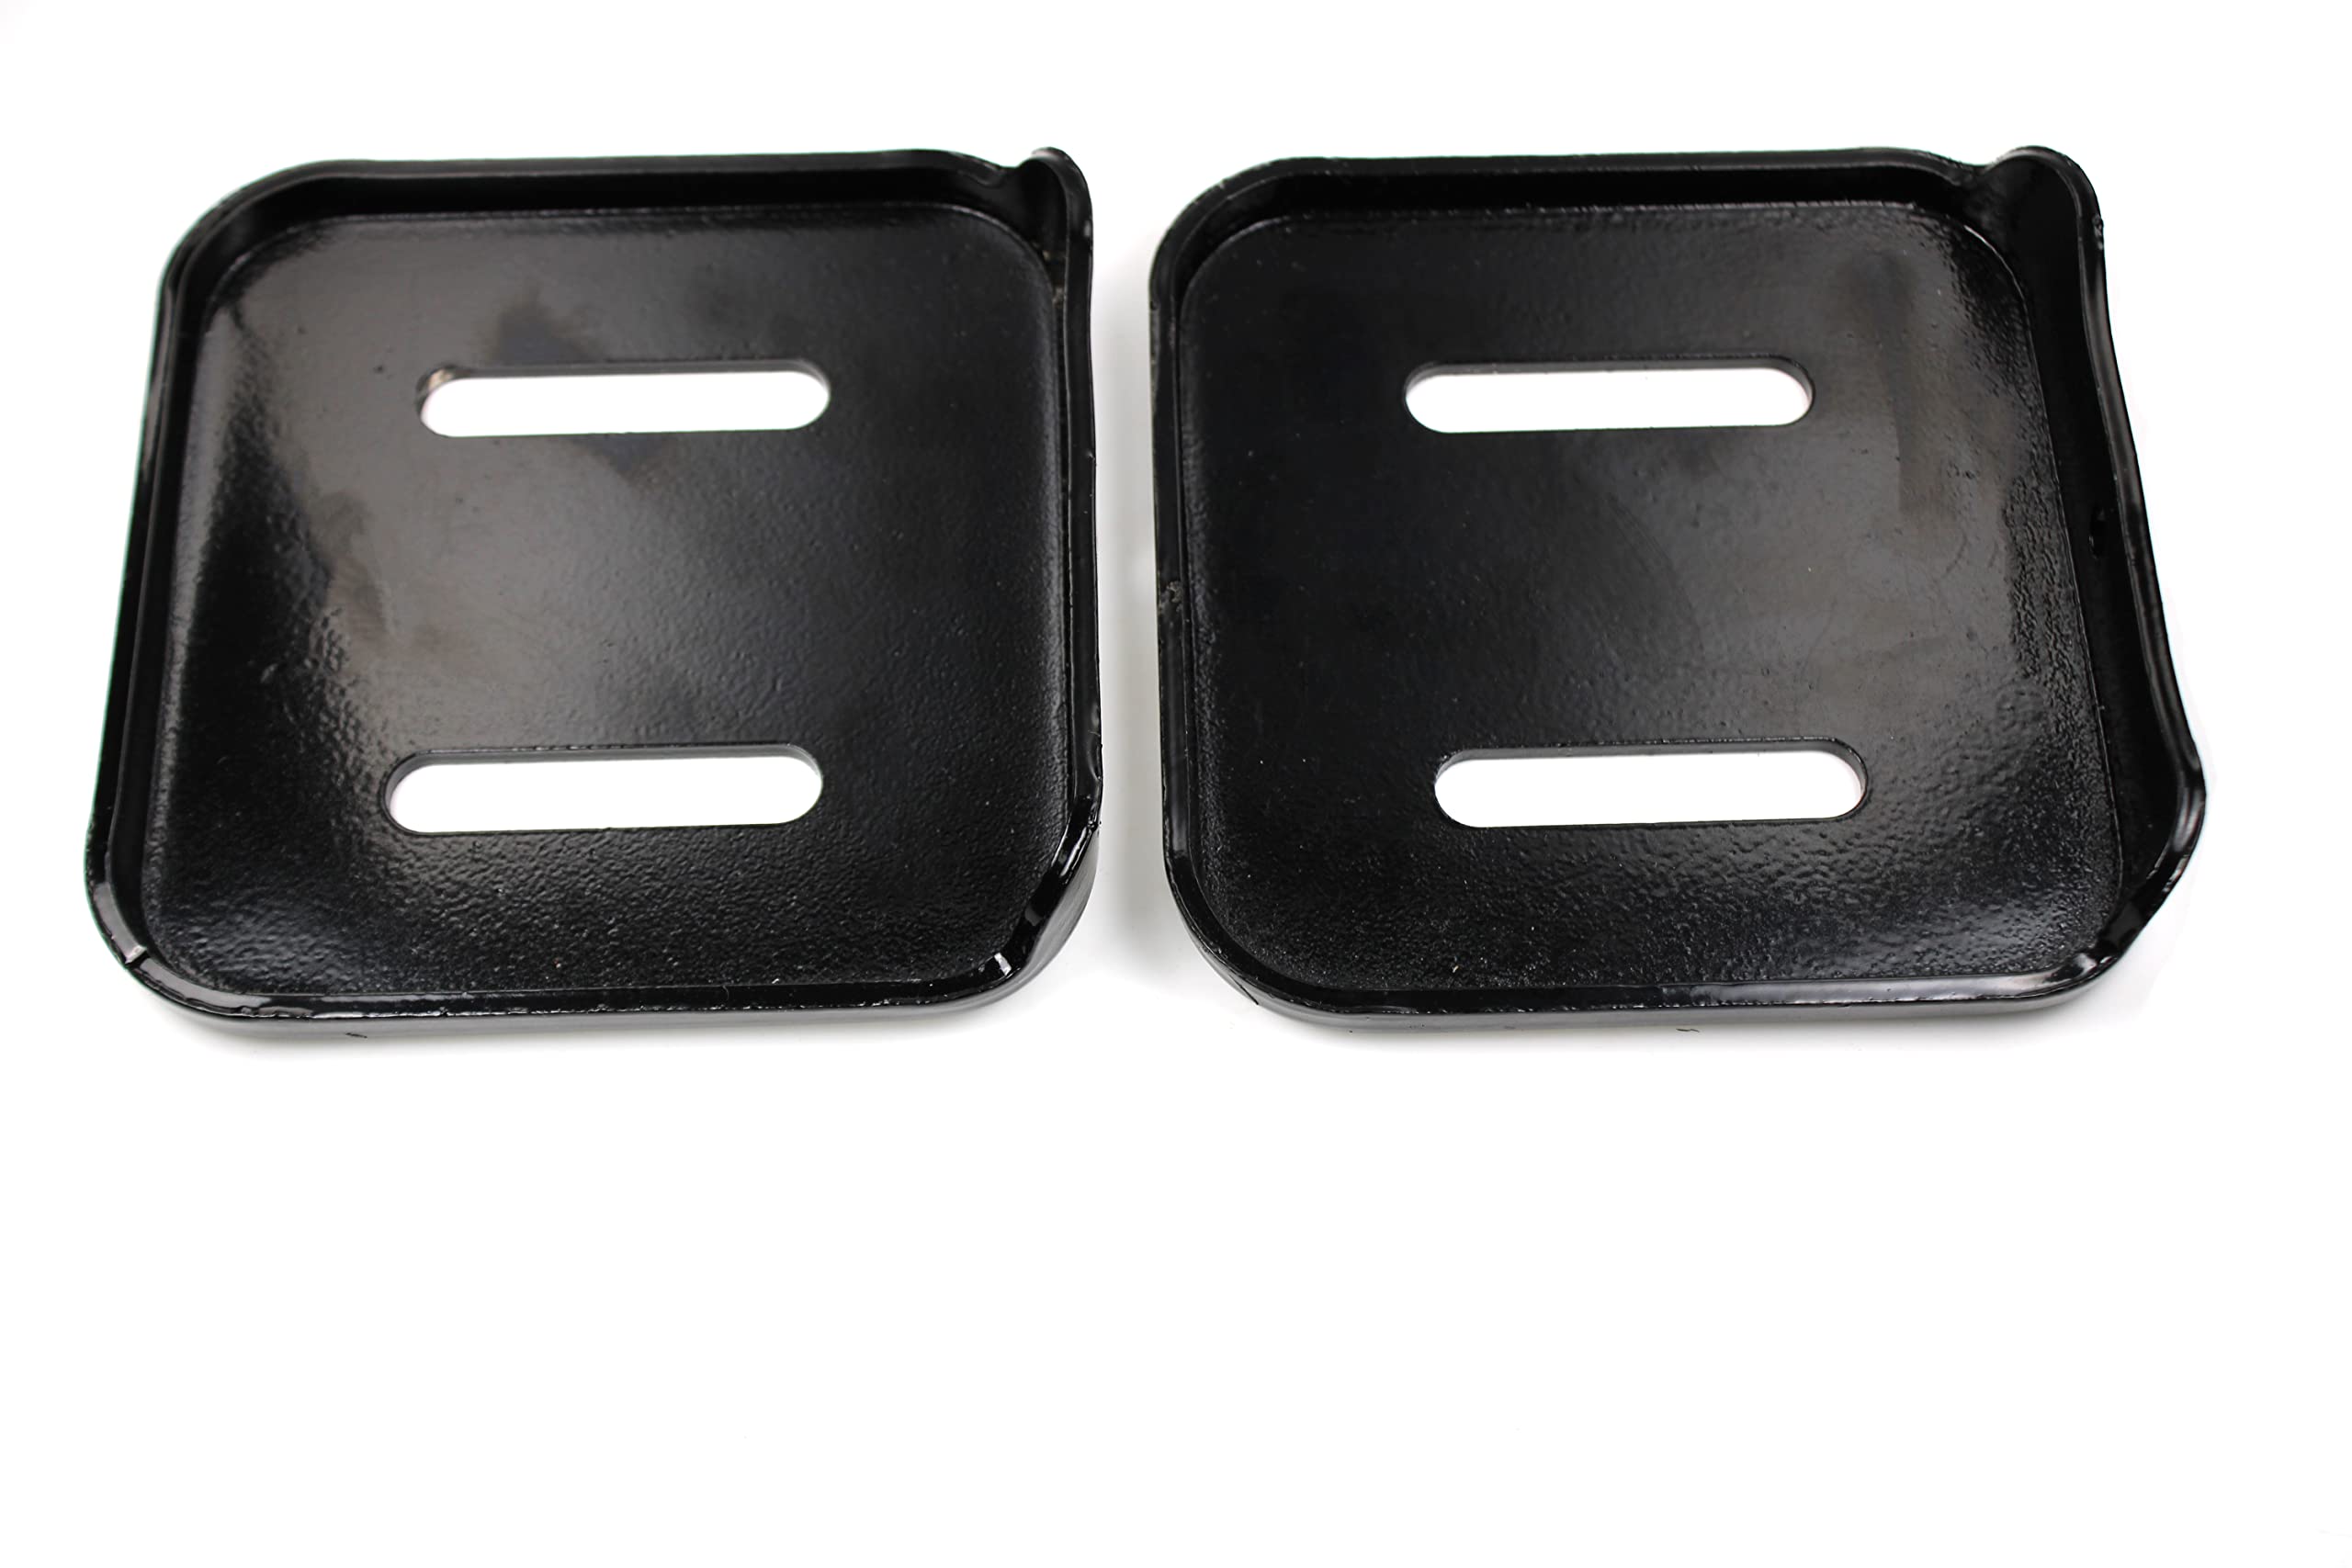 2 Pack 309016E701MA Height Adjuster Skid Shoes with Hardware for Murray Craftsman Sears Snowblower